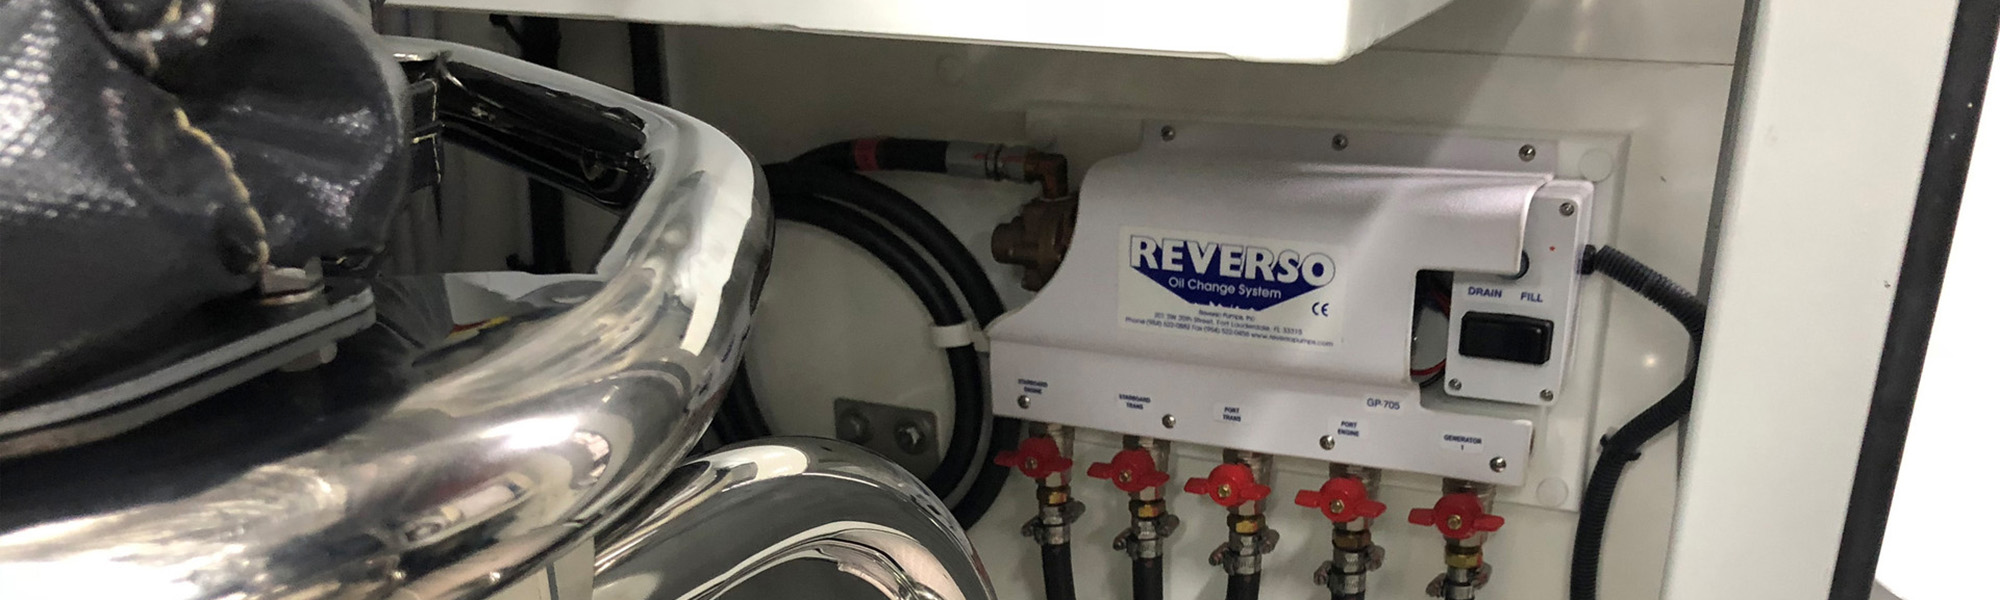 reverso-oil-change-systems